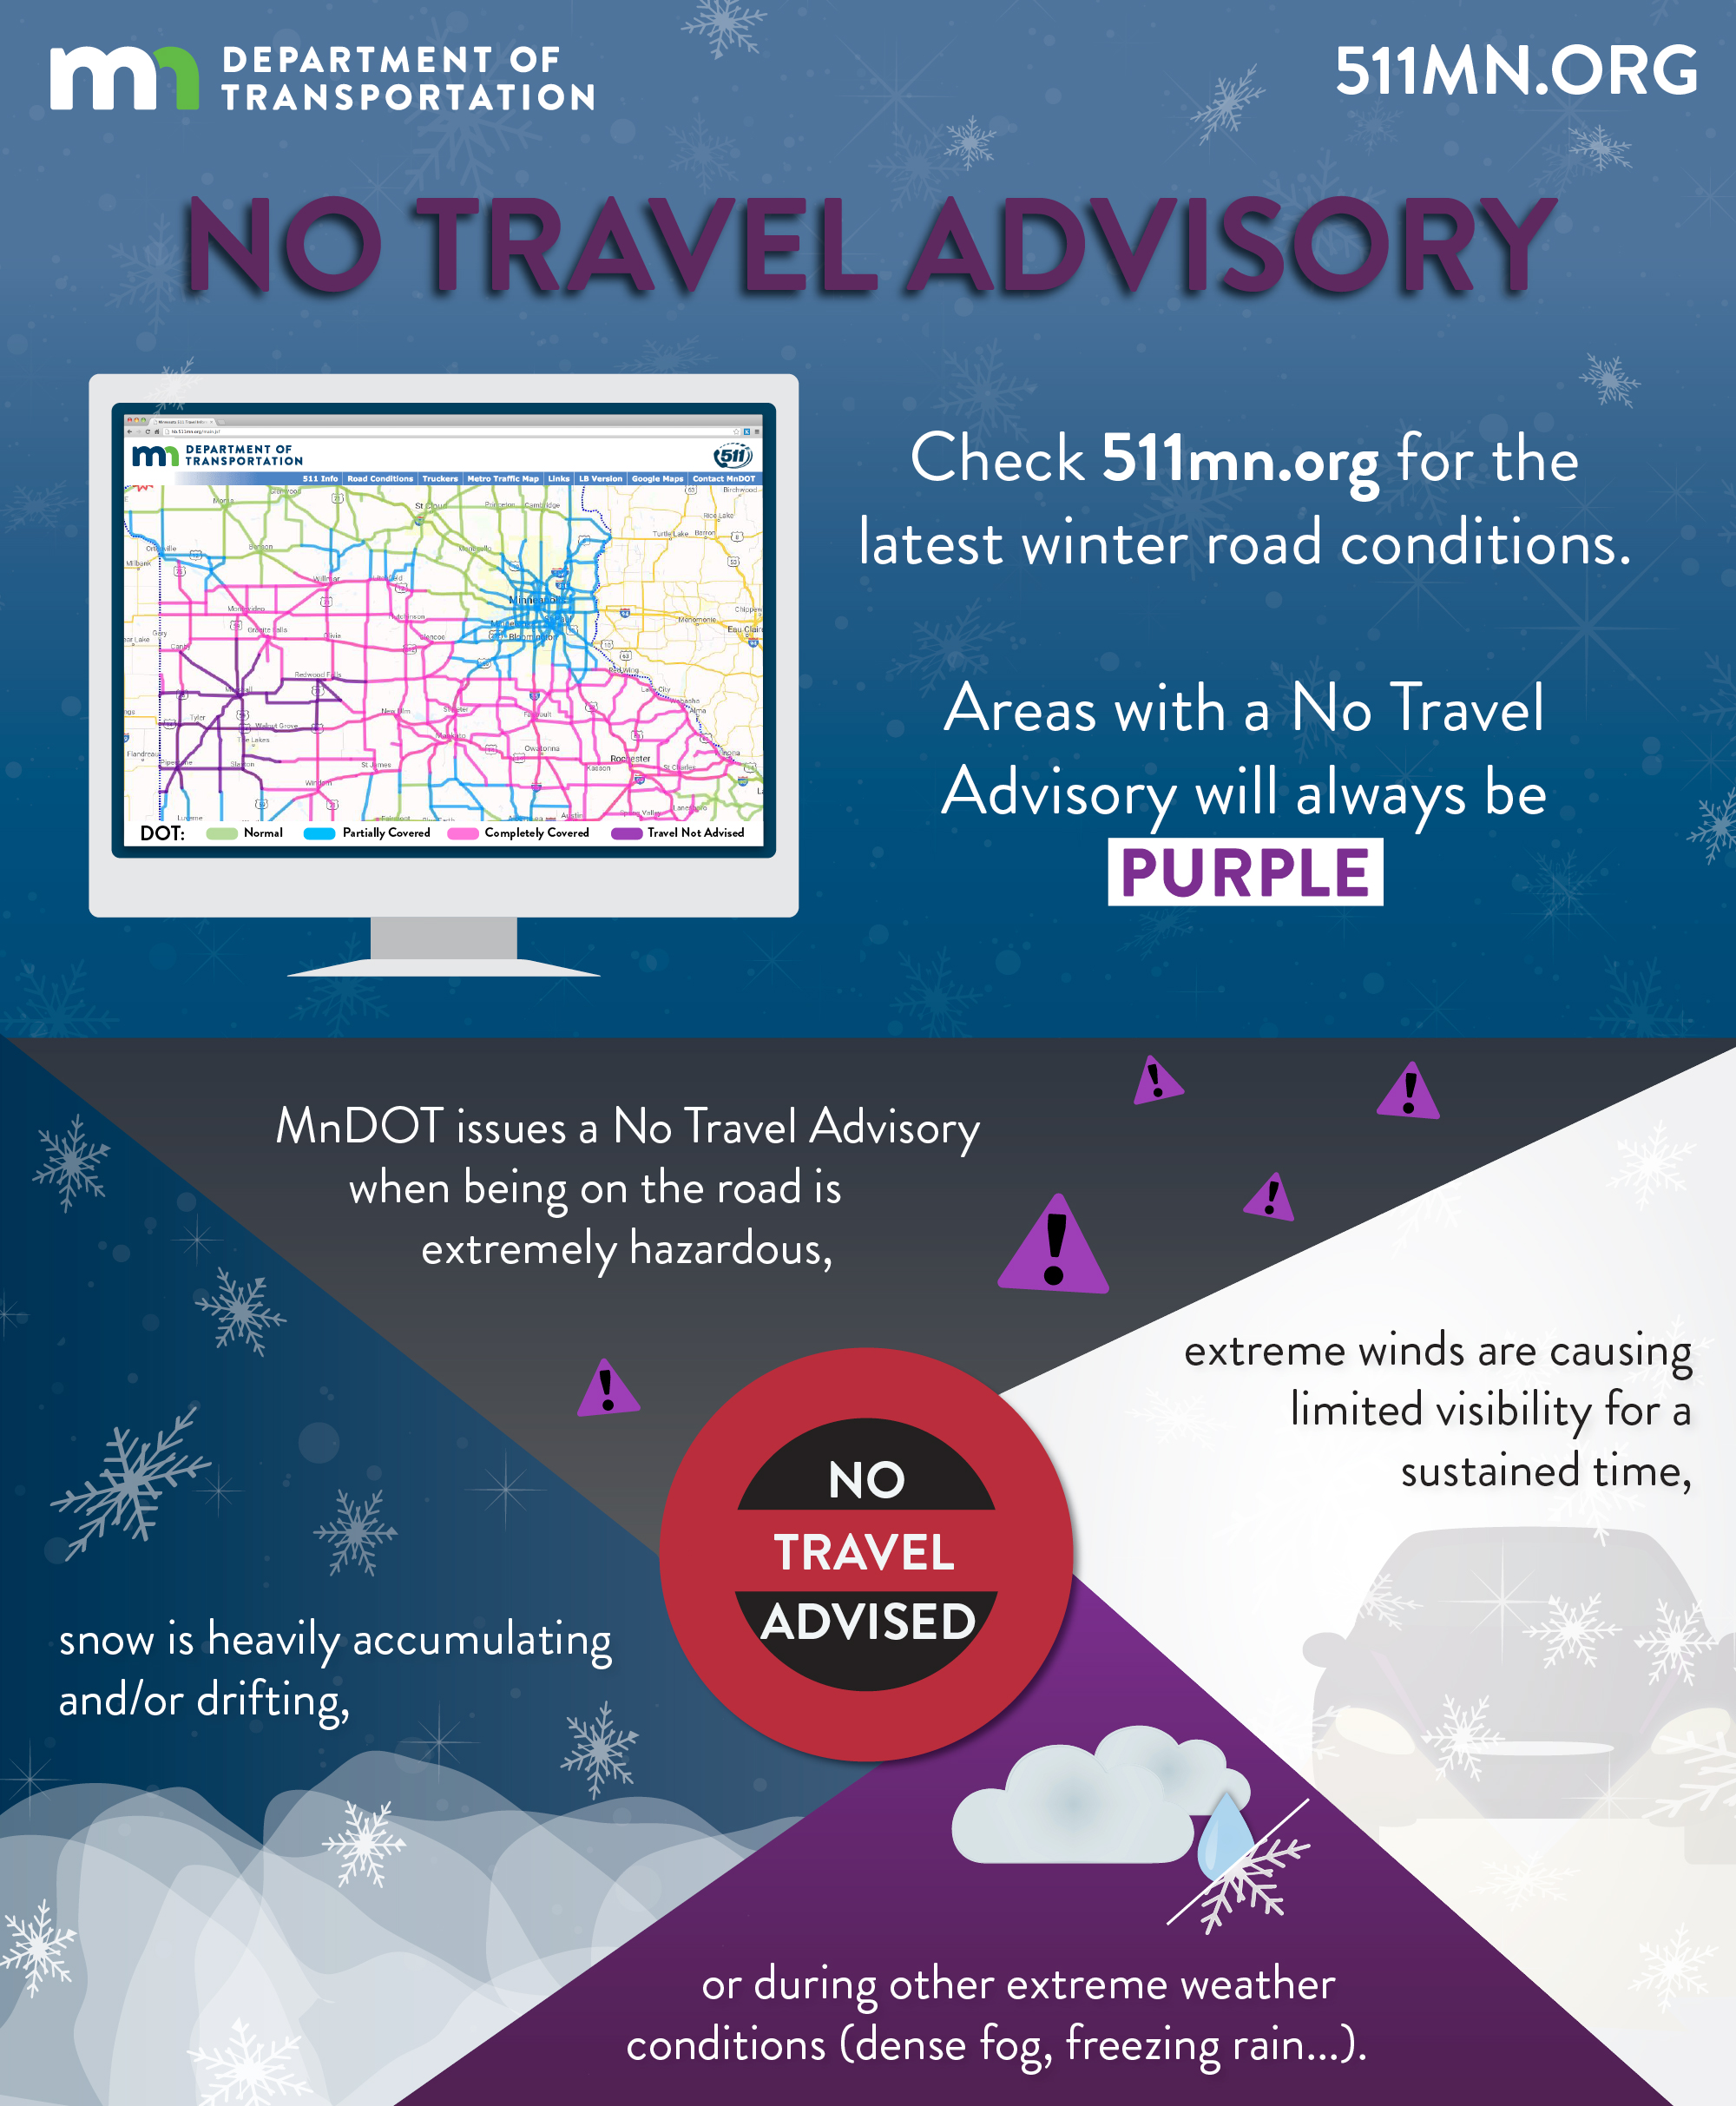 Check 511.mn.org for the latest winter road conditions. Areas with a No Travel Advisory will always be purple.